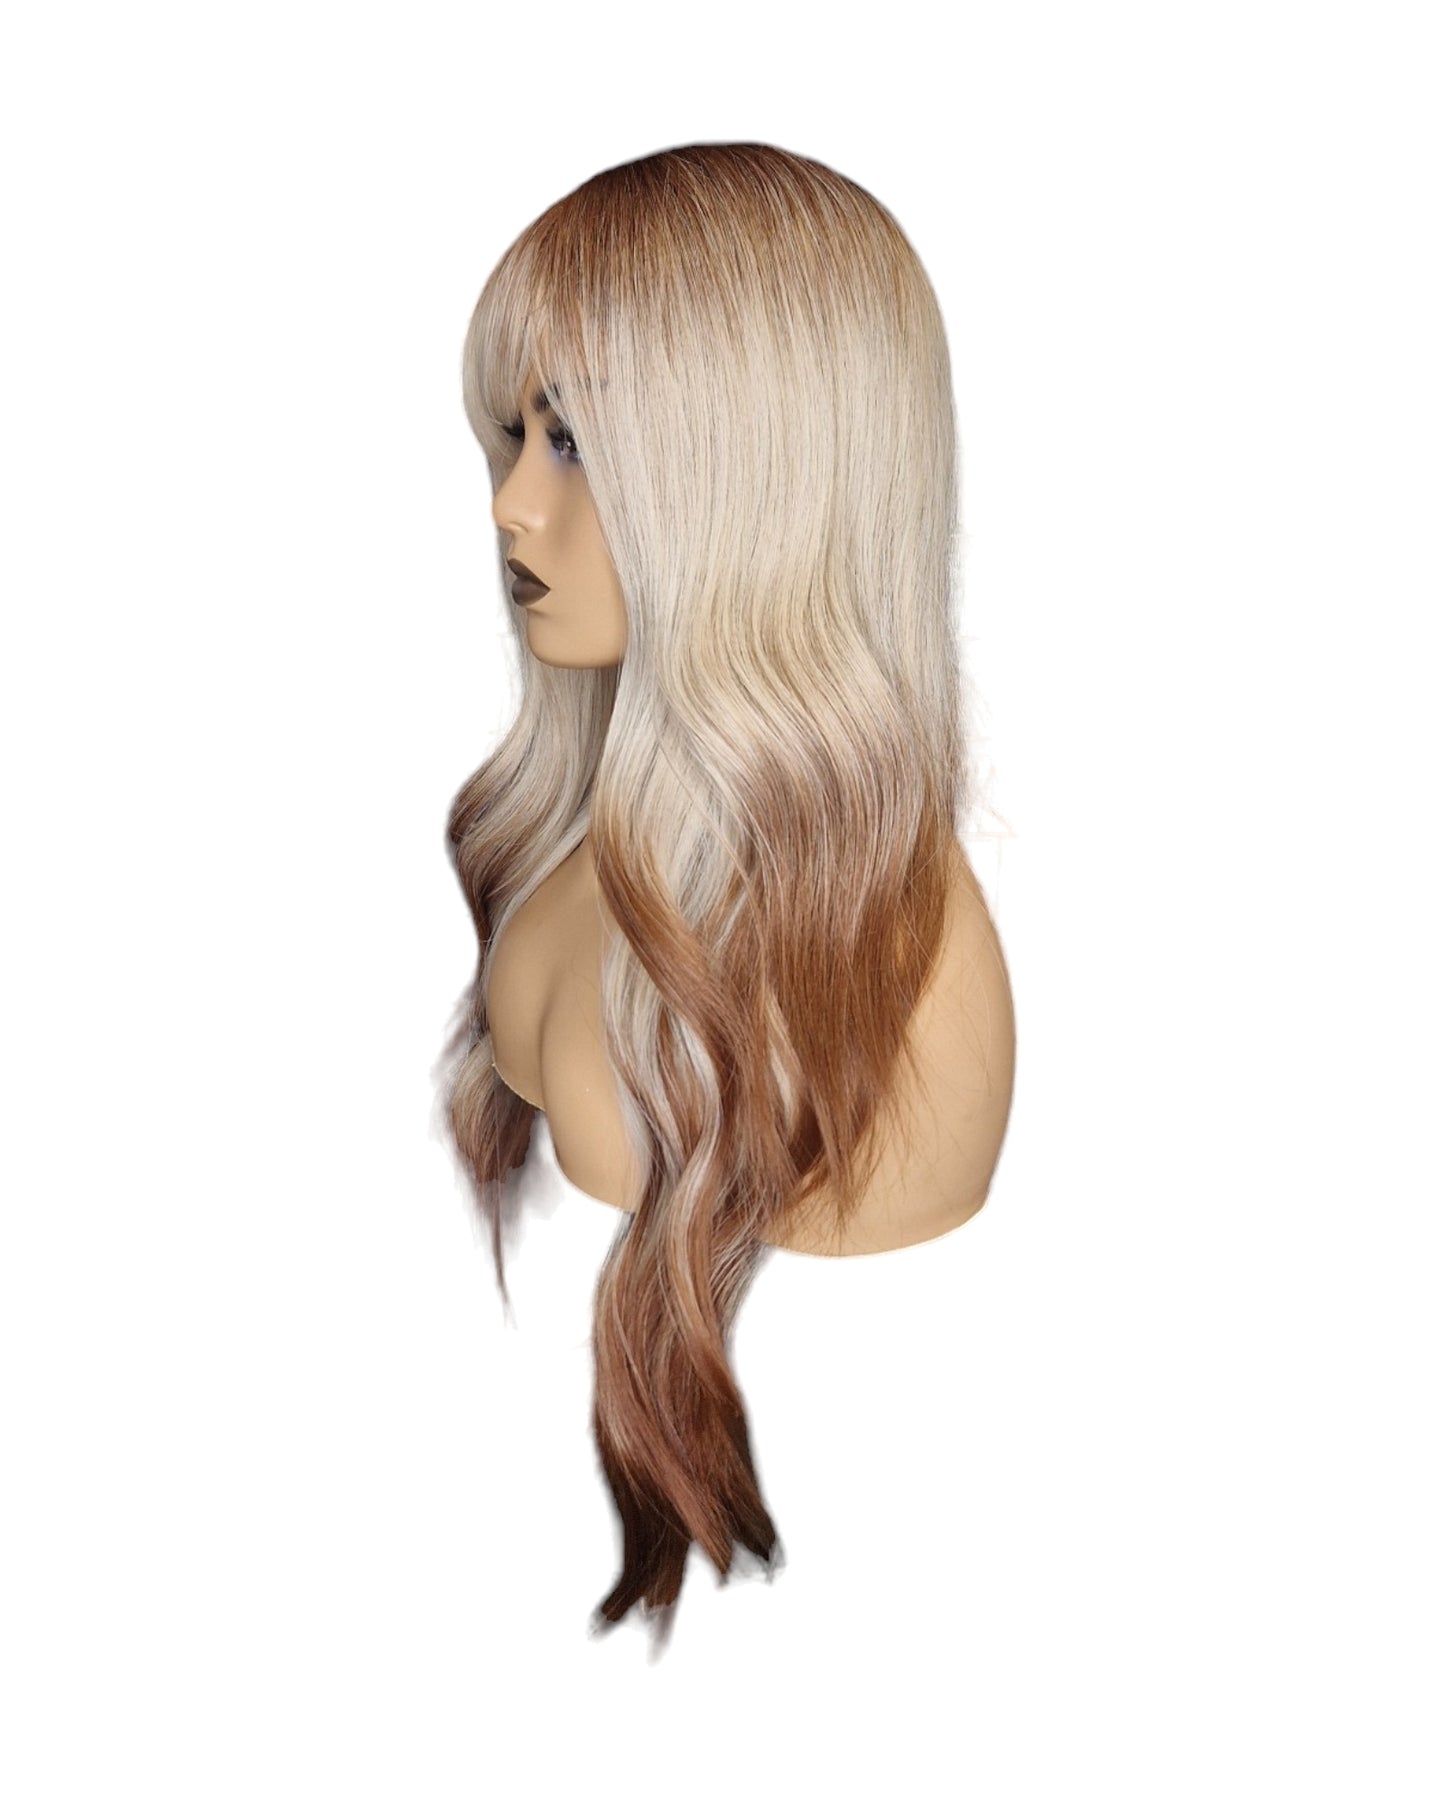 Ombre Long Wavy Blonde Y2K Hairstyle Tipped Wig. Suki